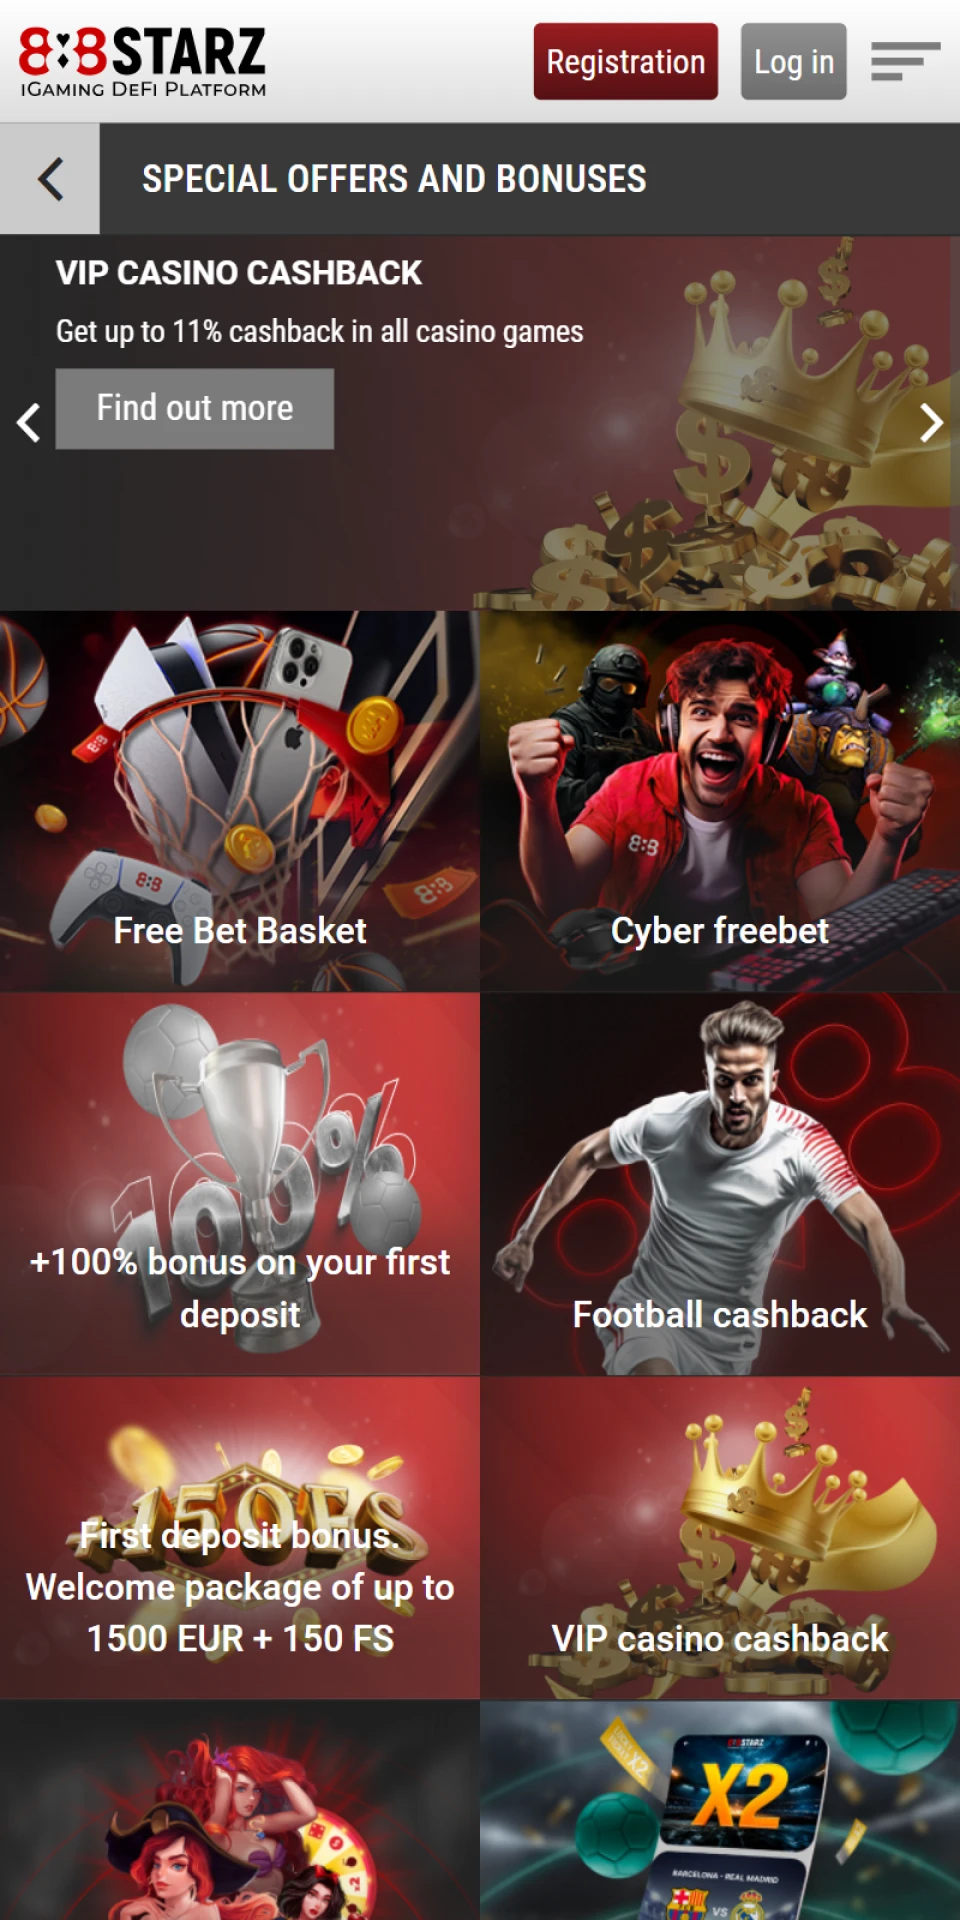 The 888Starz mobile app offers a variety of sports and casino betting bonuses.